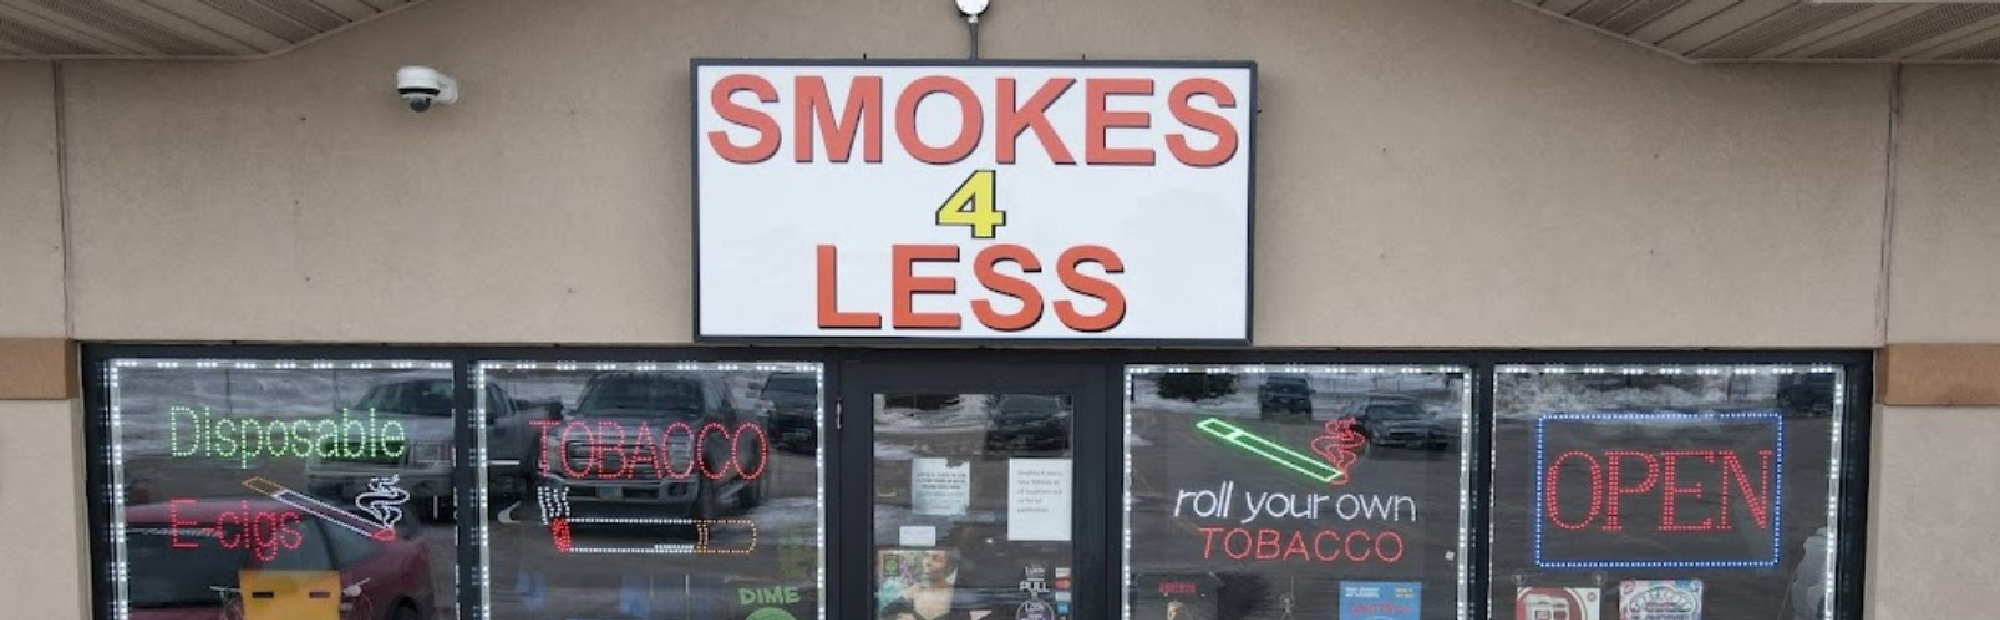 image of smokes 4 less in fargo nd